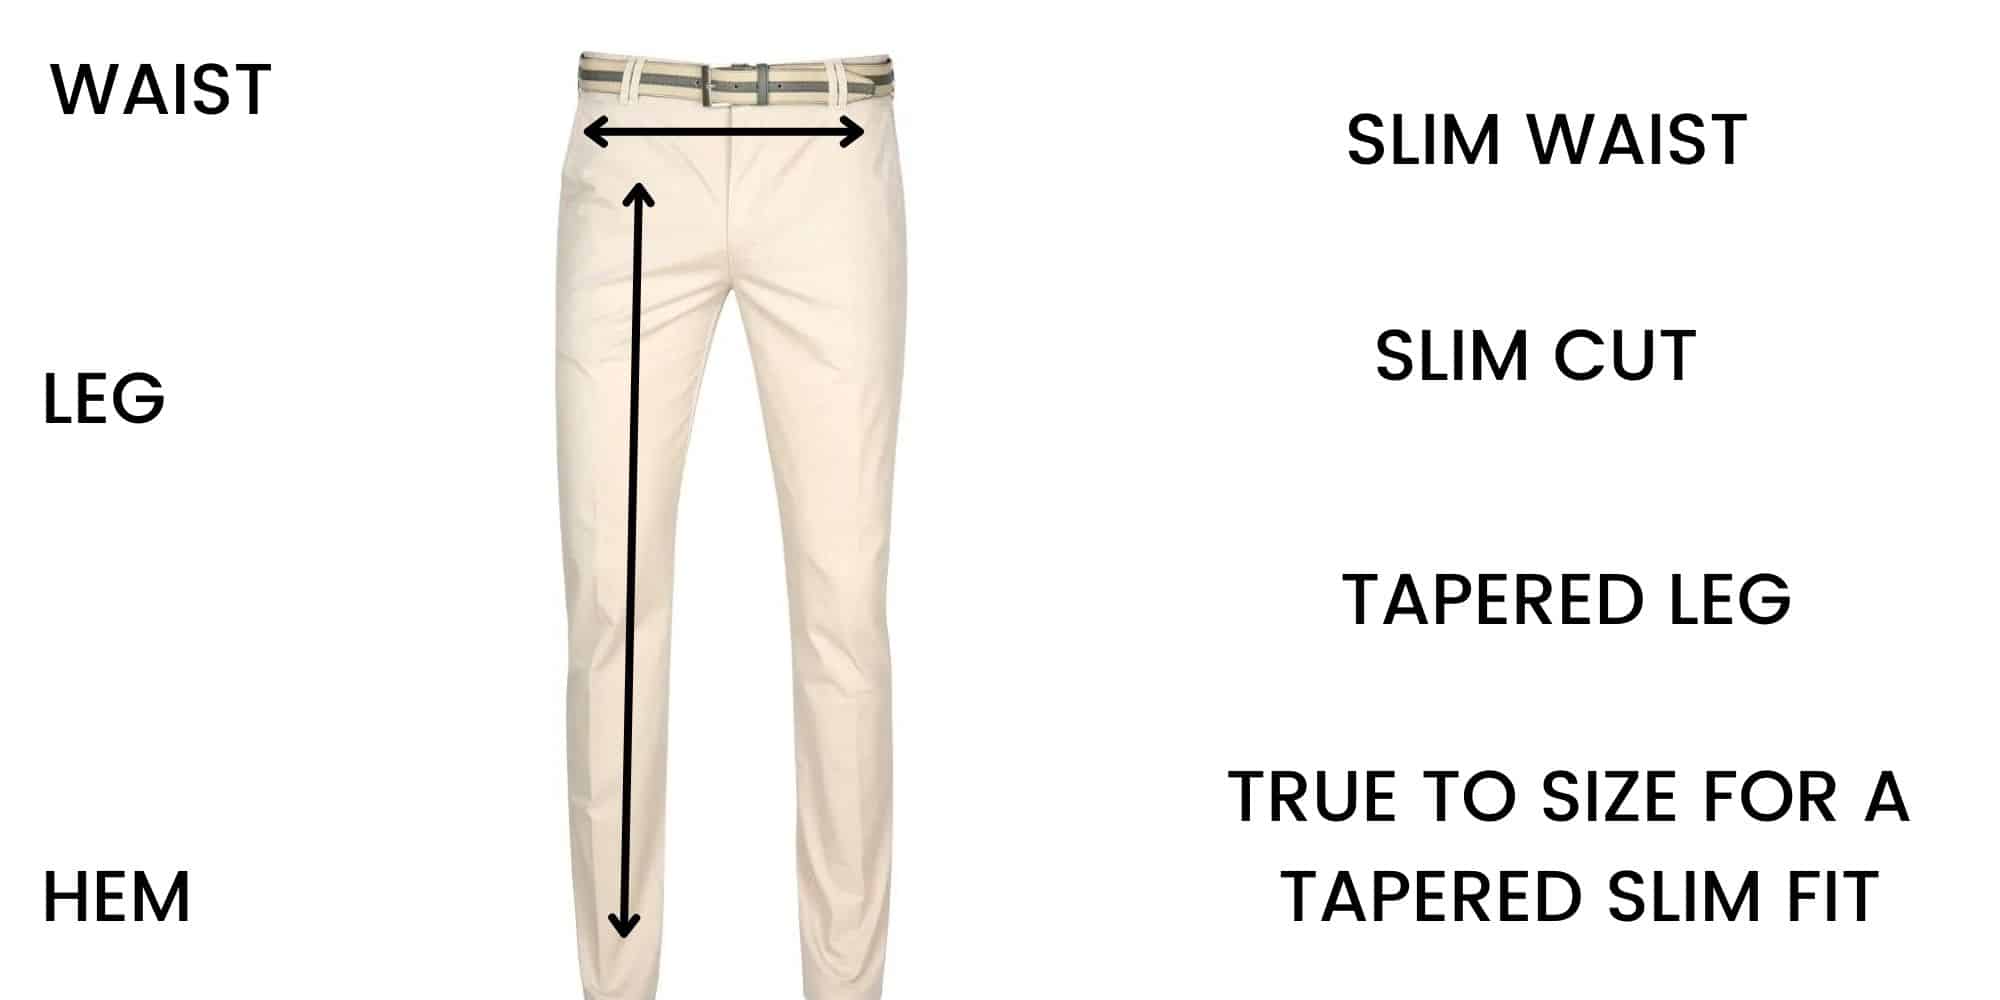 Meyer trousers Rio Size Chart